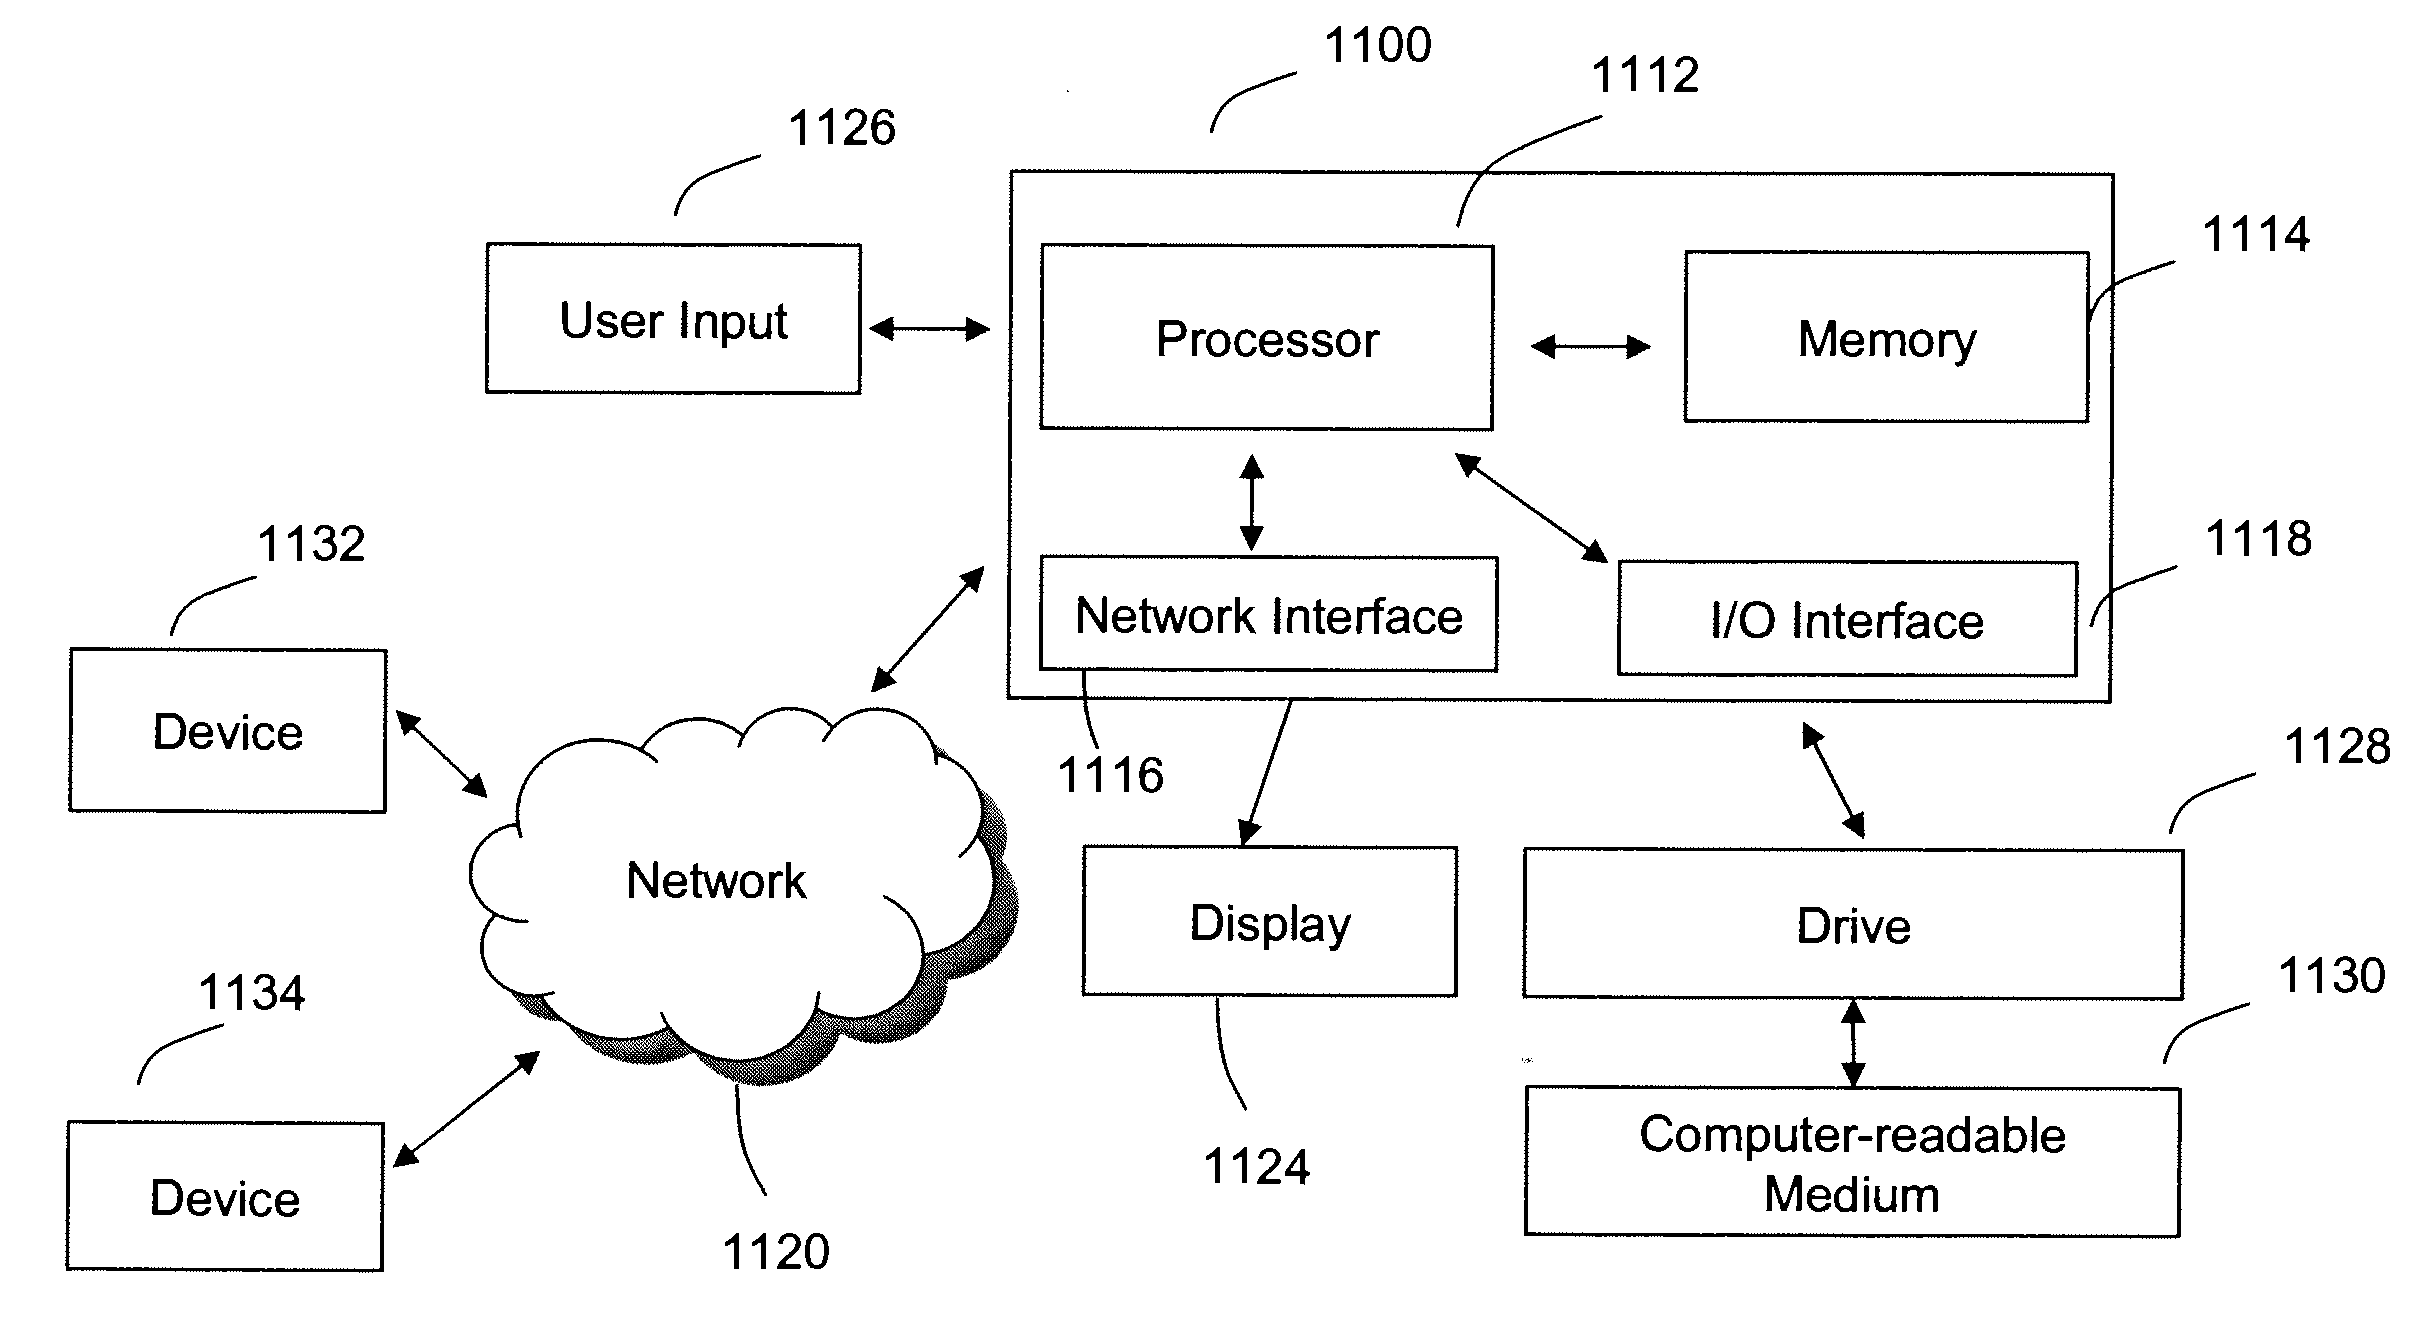 Systems and methods for improved billing and ordering